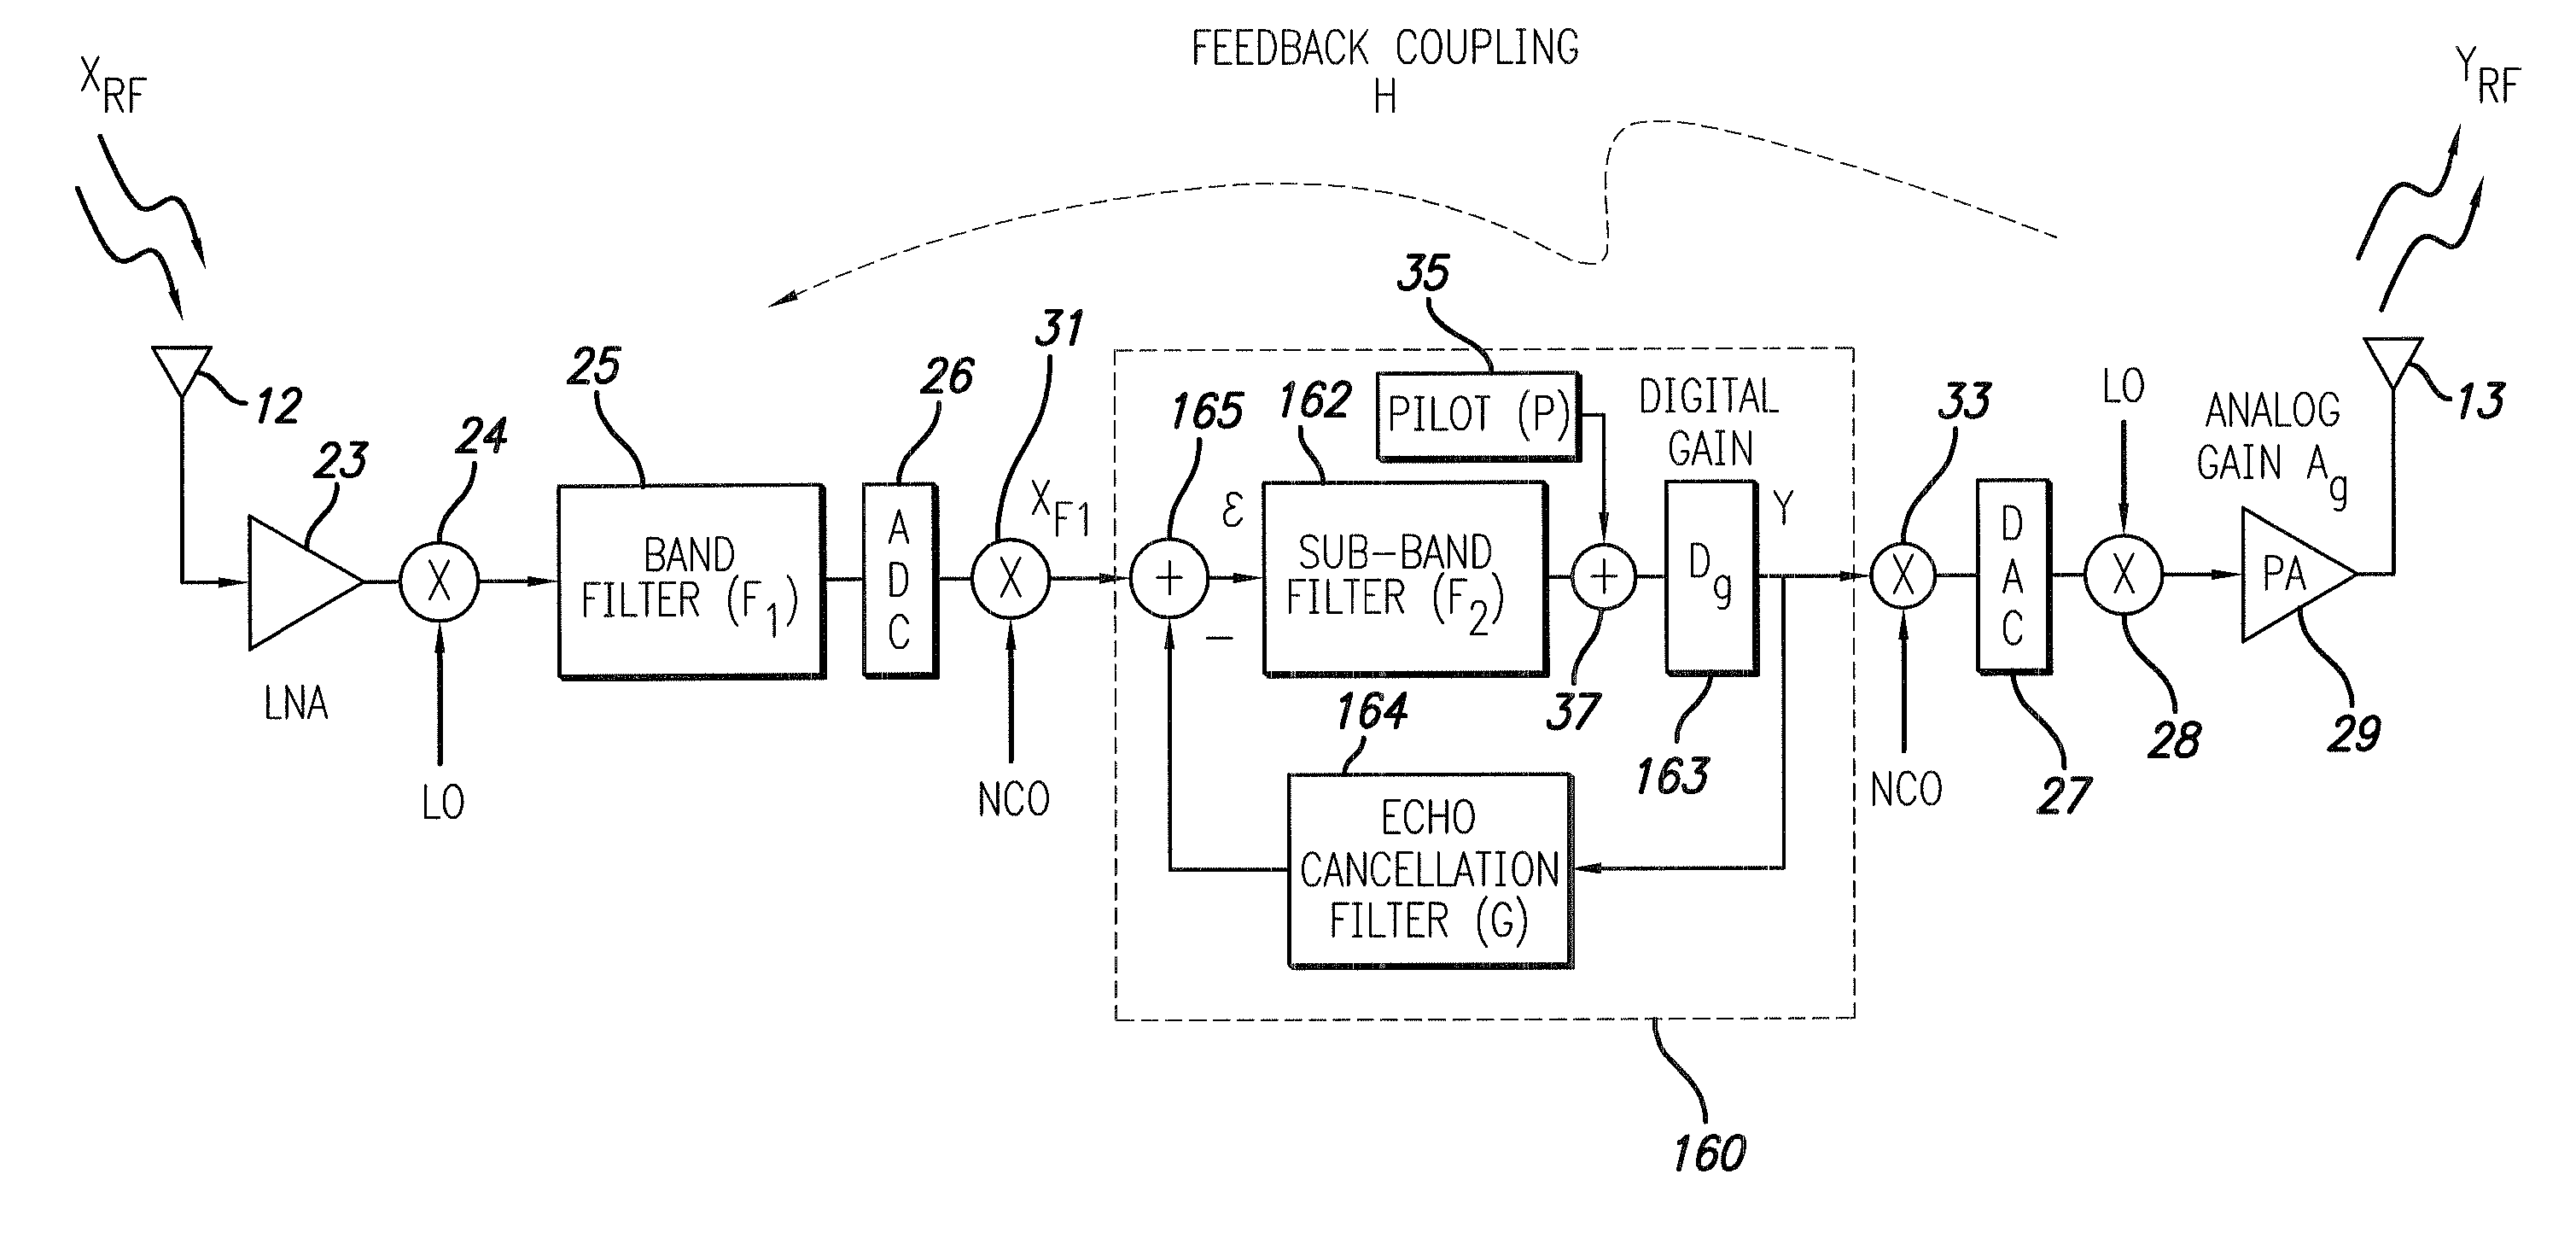 Adaptive echo cancellation for an on-frequency RF repeater with digital sub-band filtering